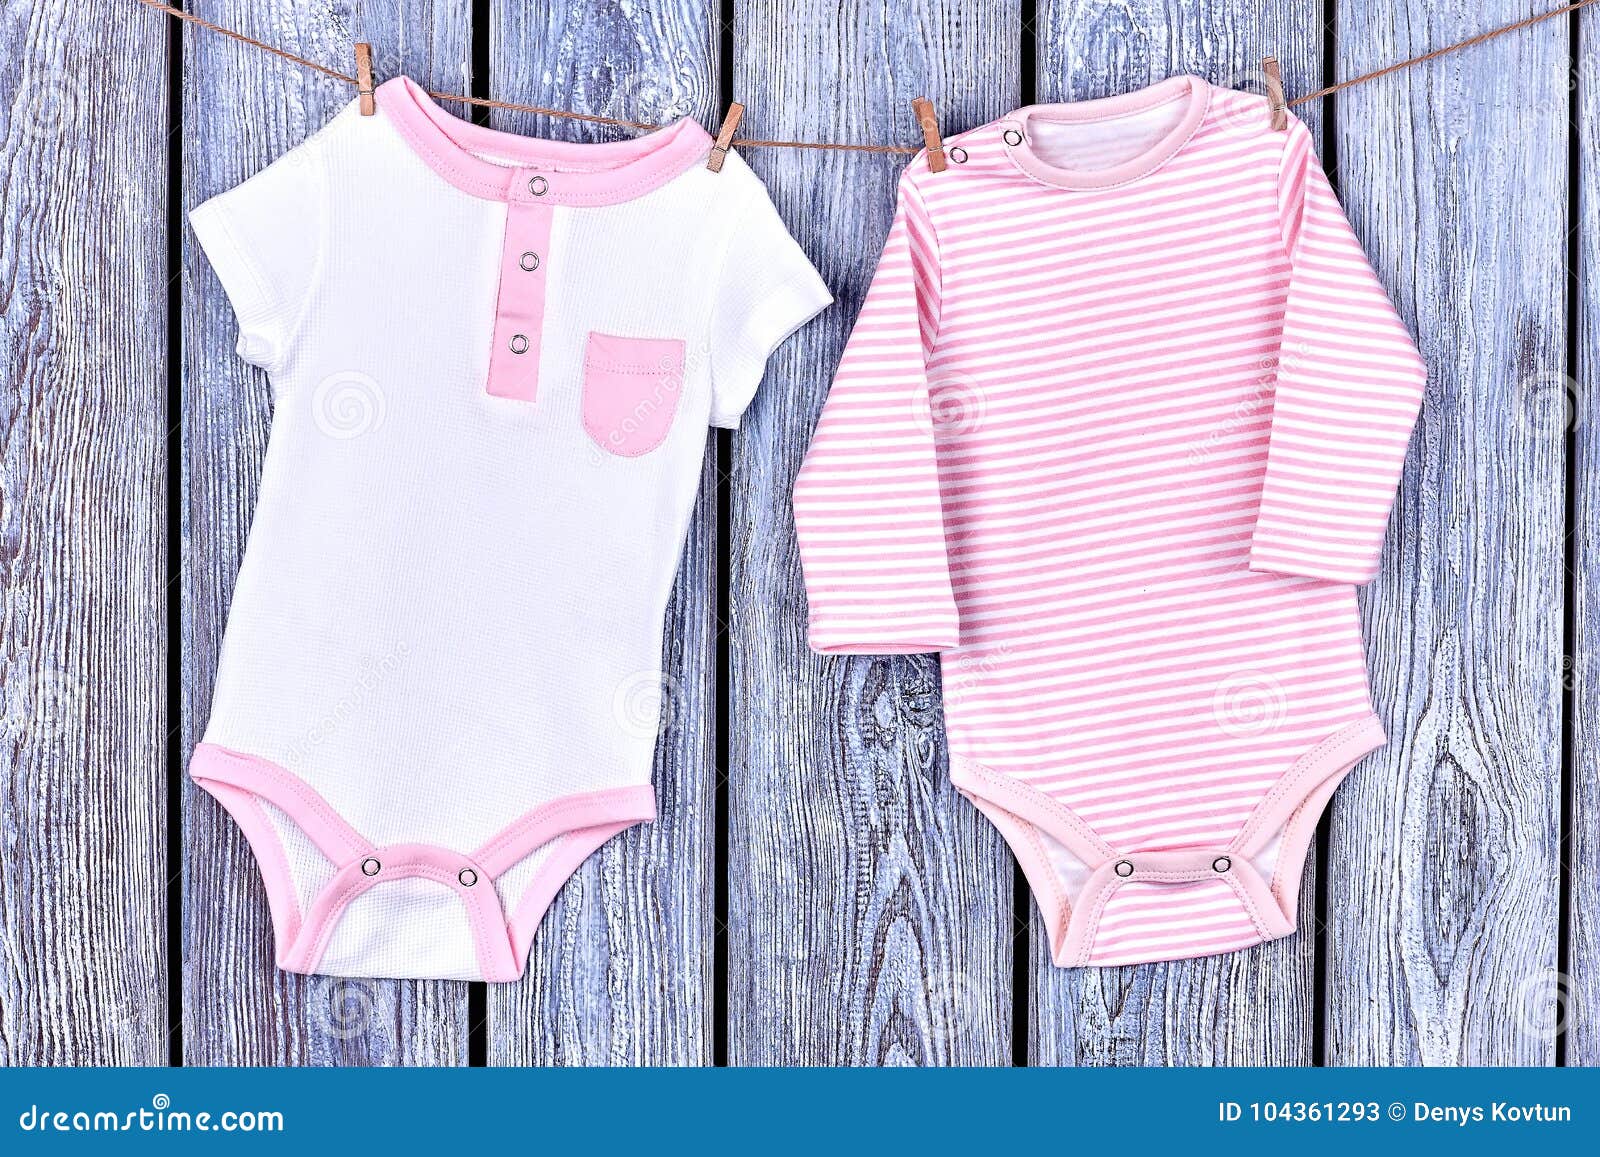 Infants Rompers Hanging on Rope. Stock Image - Image of apparel, little ...